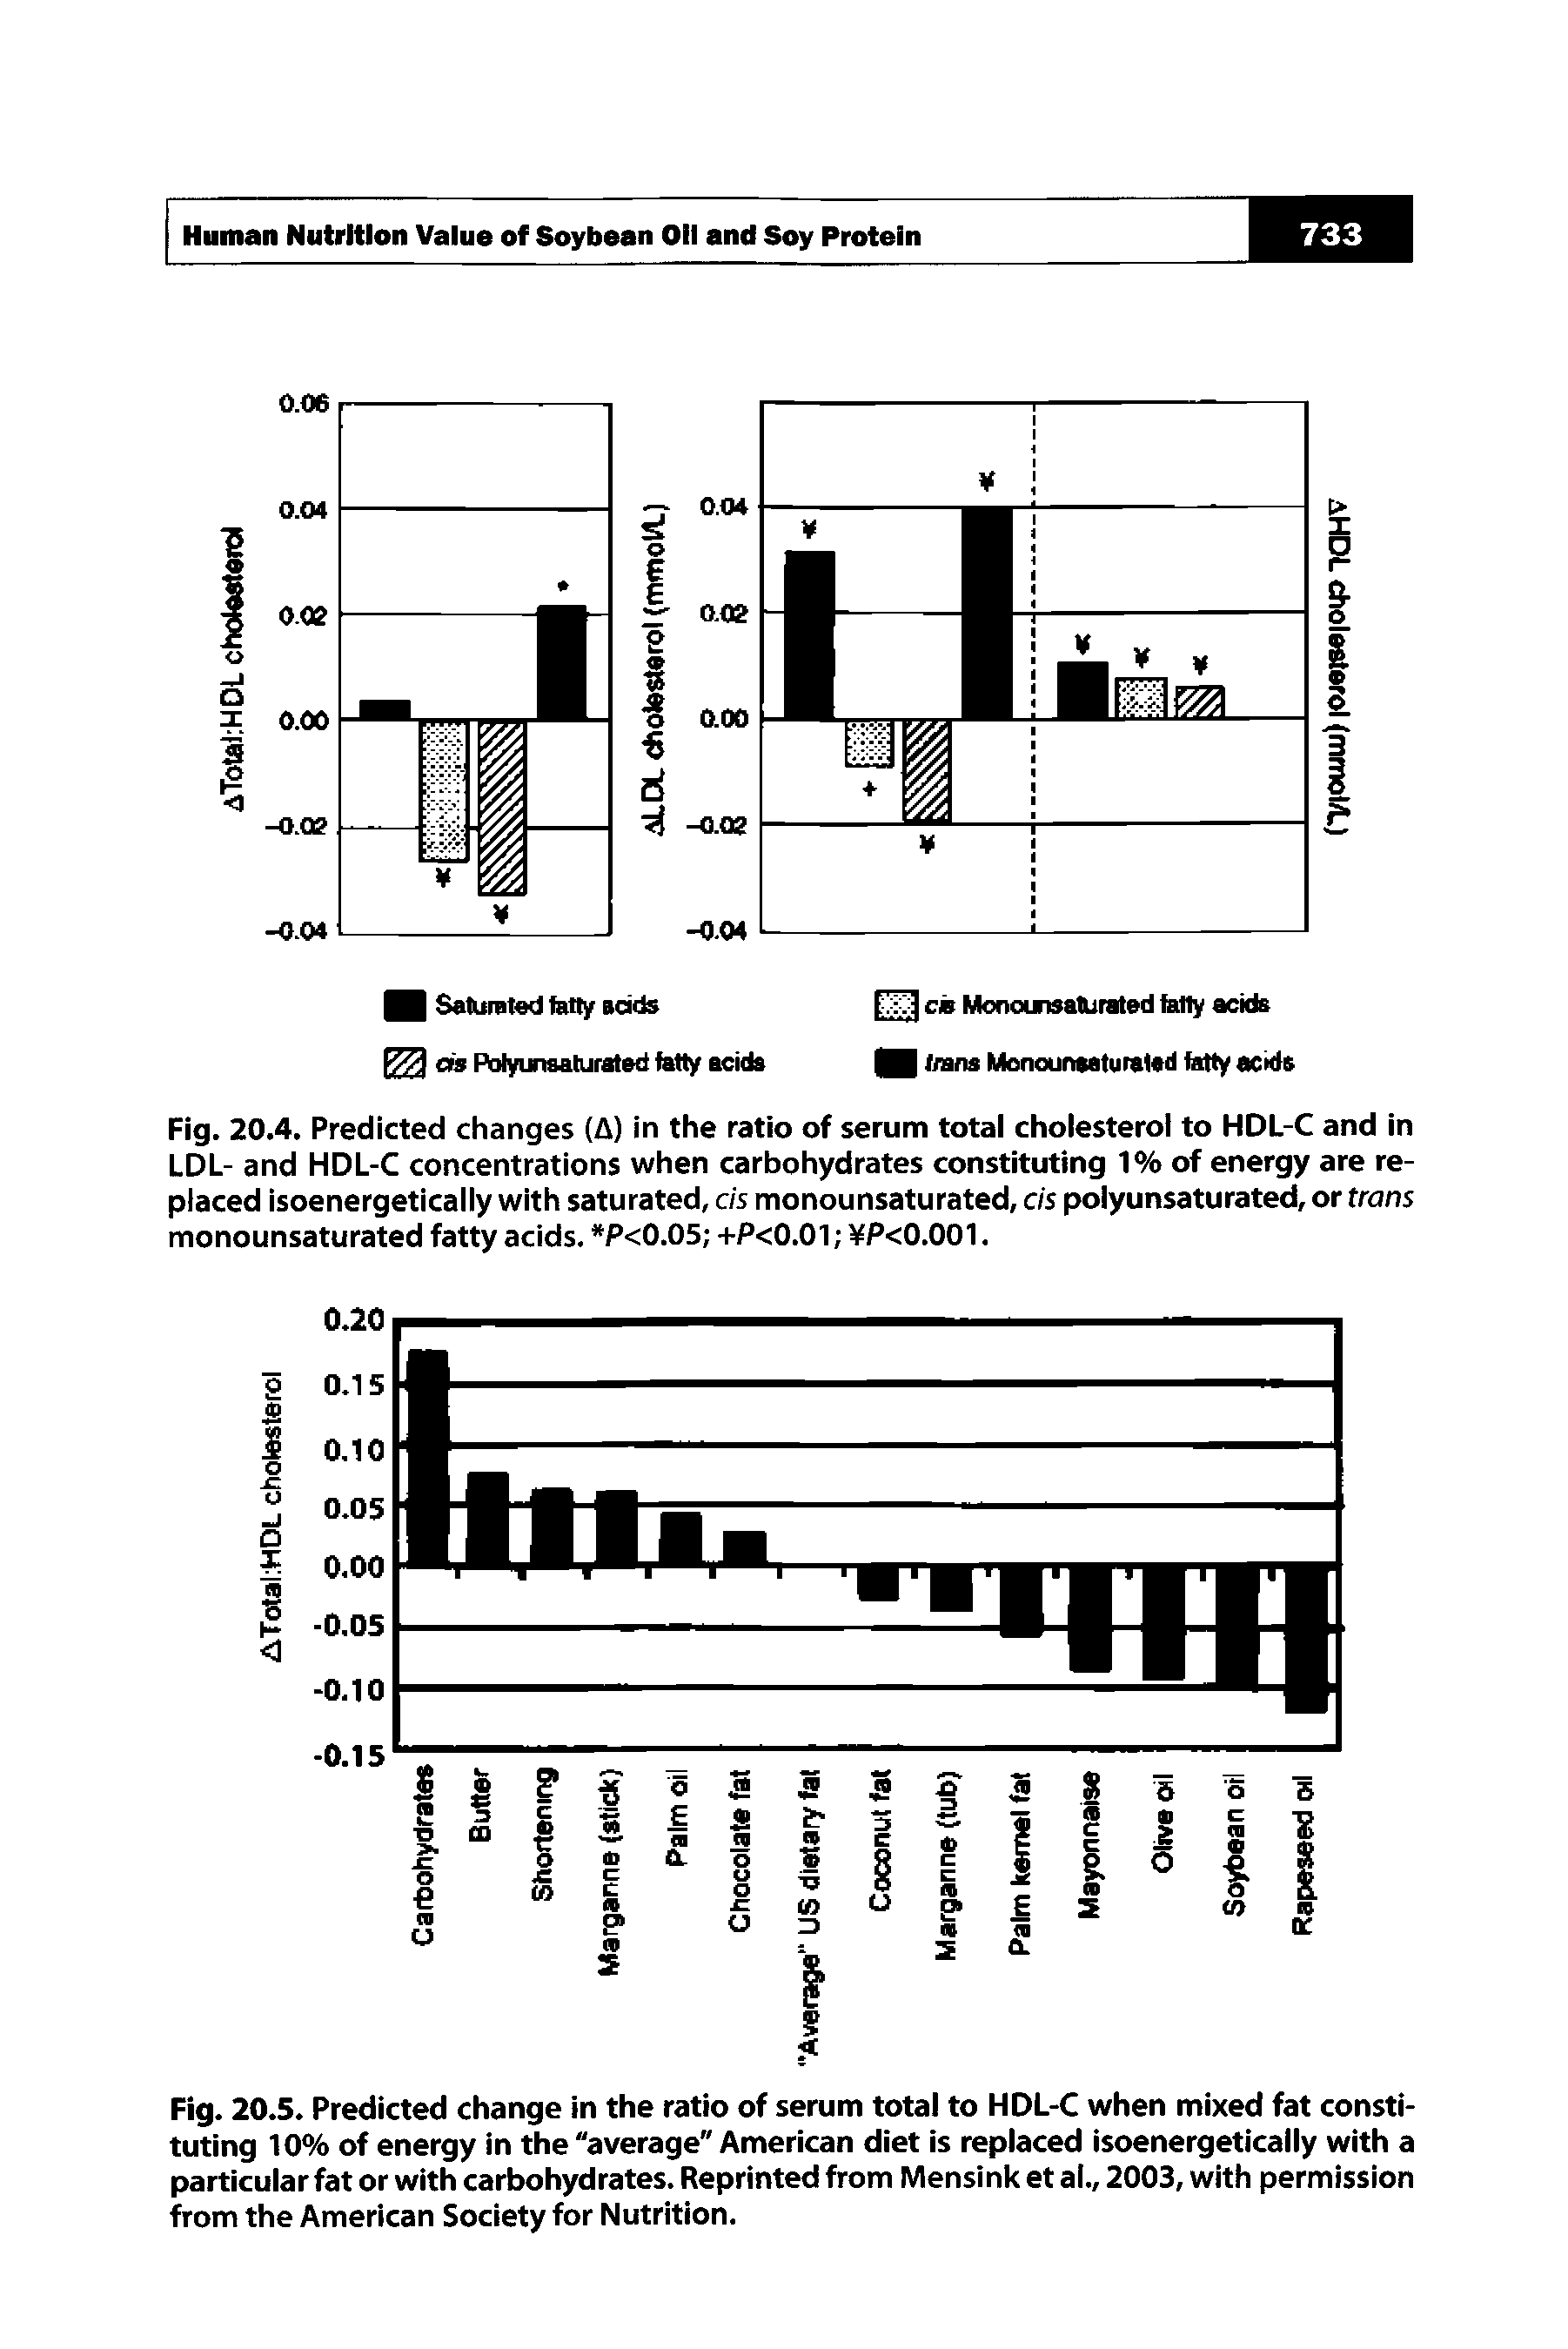 Fig. 20.4. Predicted changes (A) in the ratio of serum totai choiesterol to HDL-C and in LDL- and HDL-C concentrations when carbohydrates constituting 1% of energy are replaced isoenergetically with saturated, cis monounsaturated, cis poiyunsaturated, or trans monounsaturated fatty acids. P<0.05 +P<0.01 P<0.001.